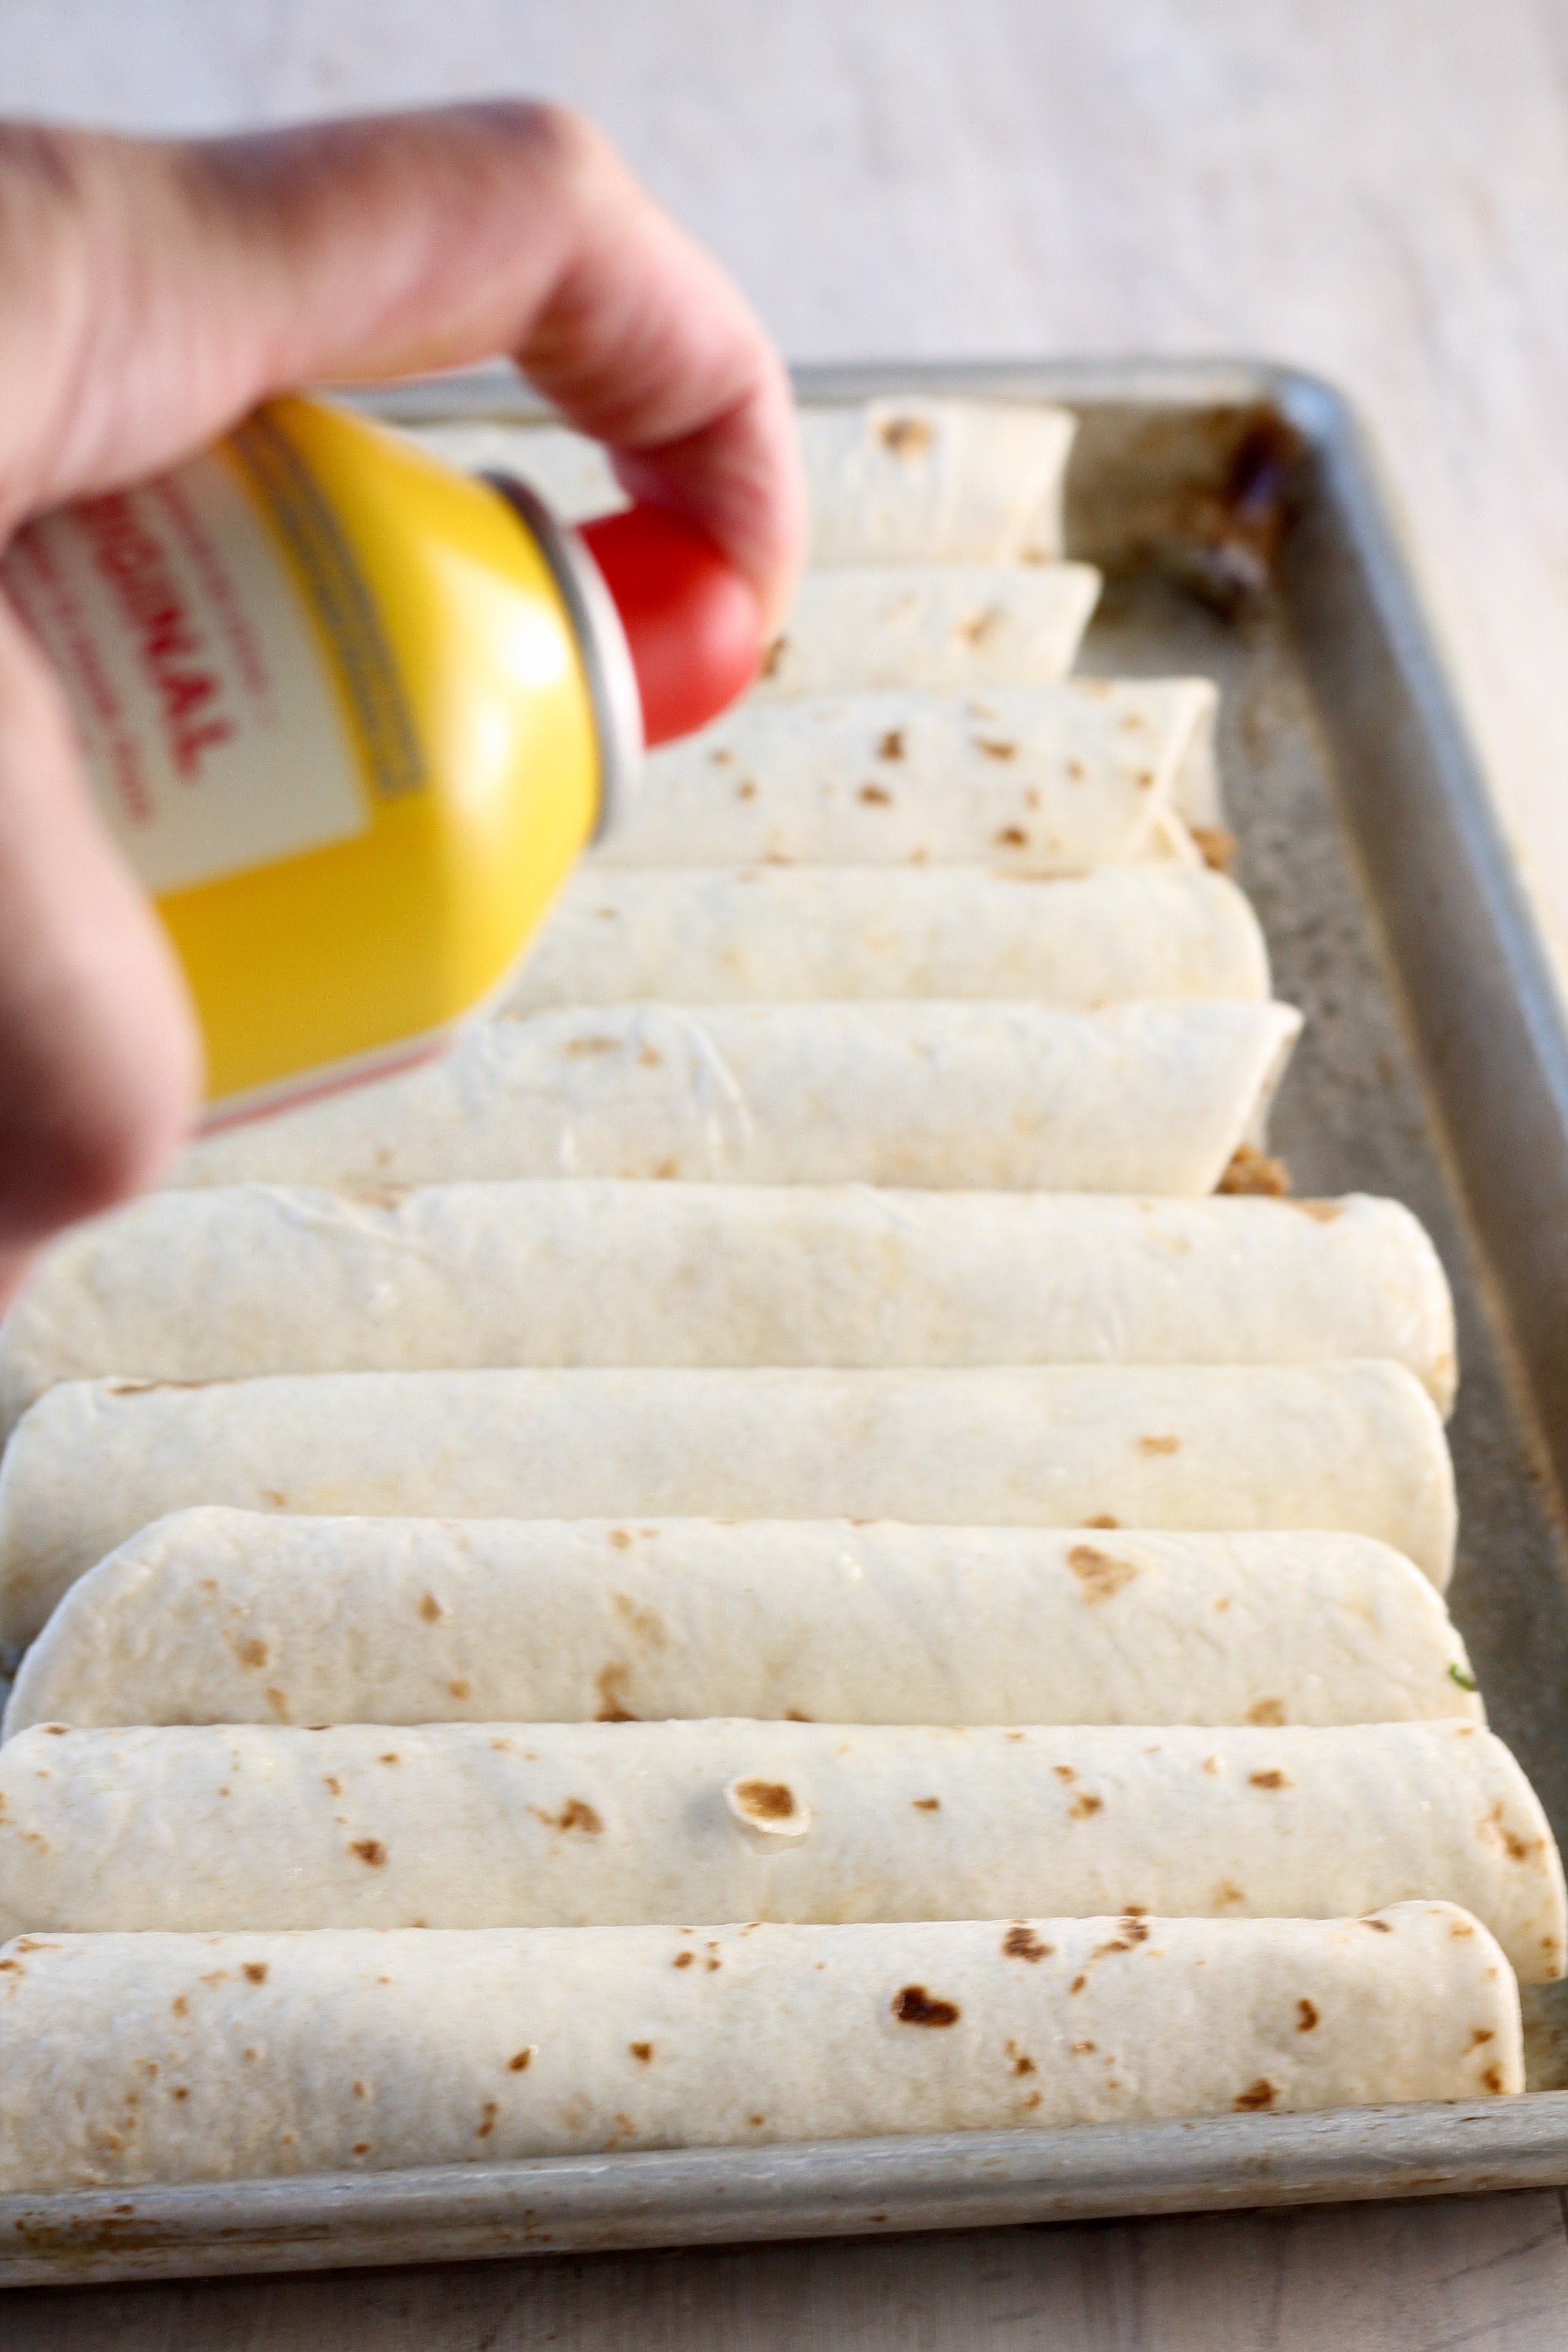 Spray brisket taquitos with non stick cooking spray to help them brown